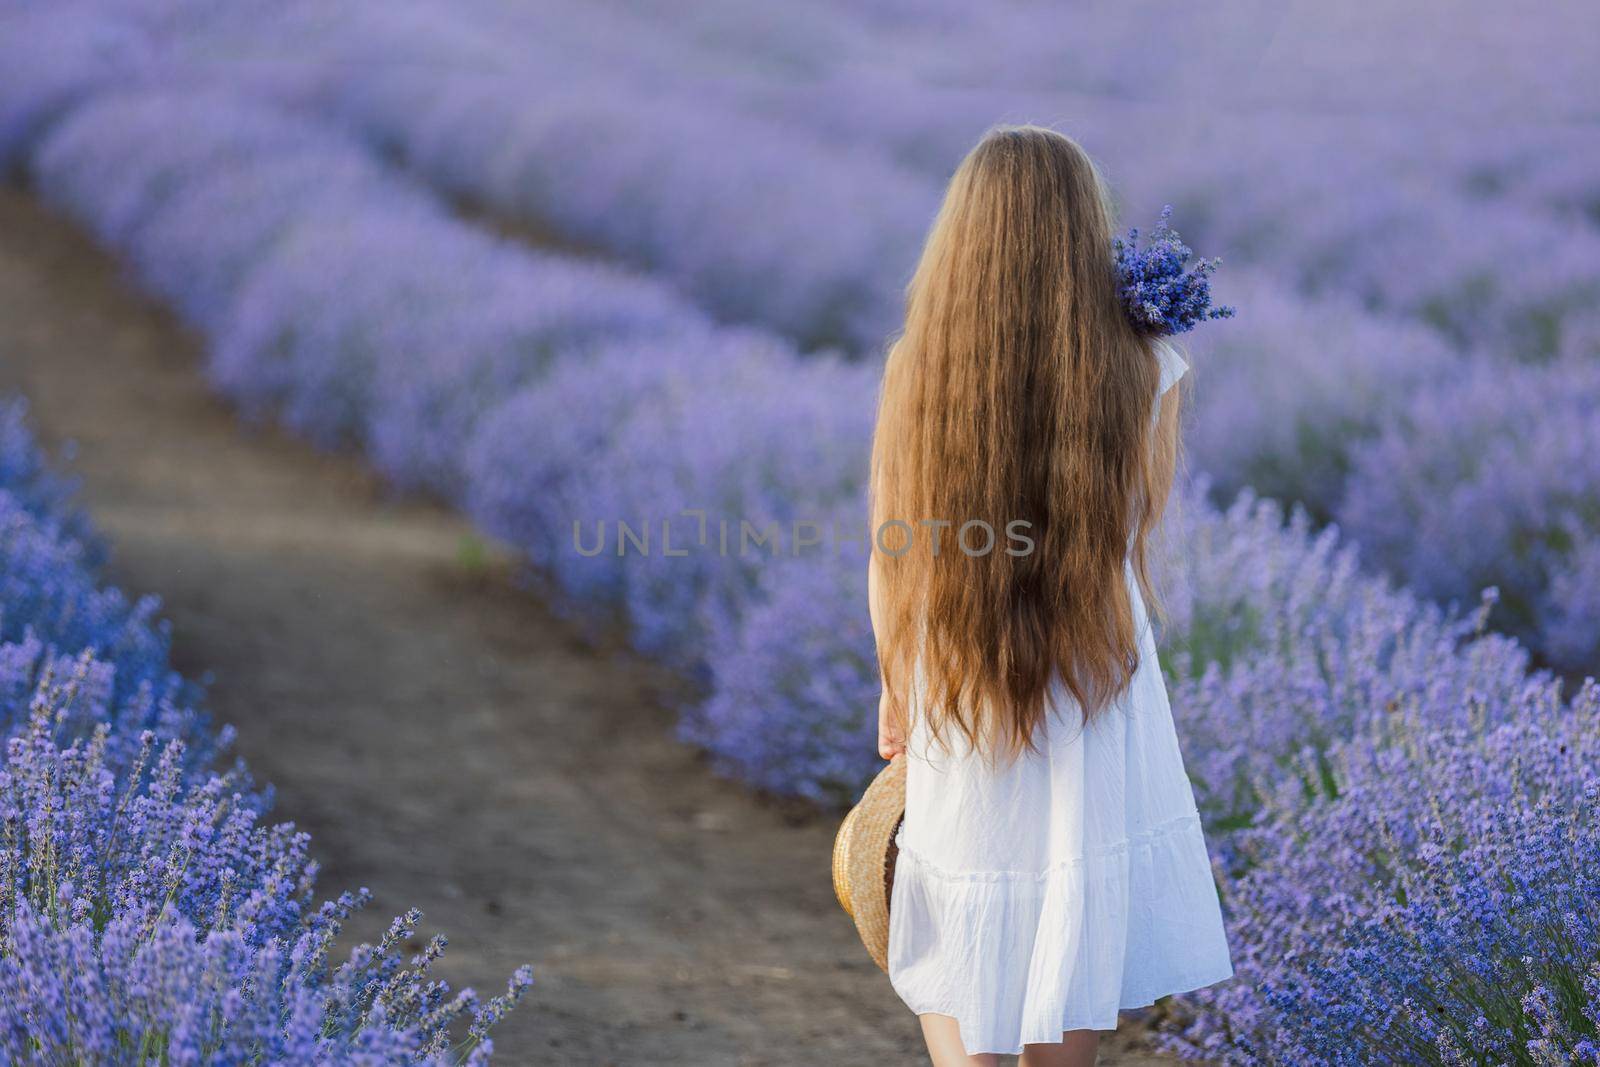 portrait of a girl with a bouquet on a lavender field